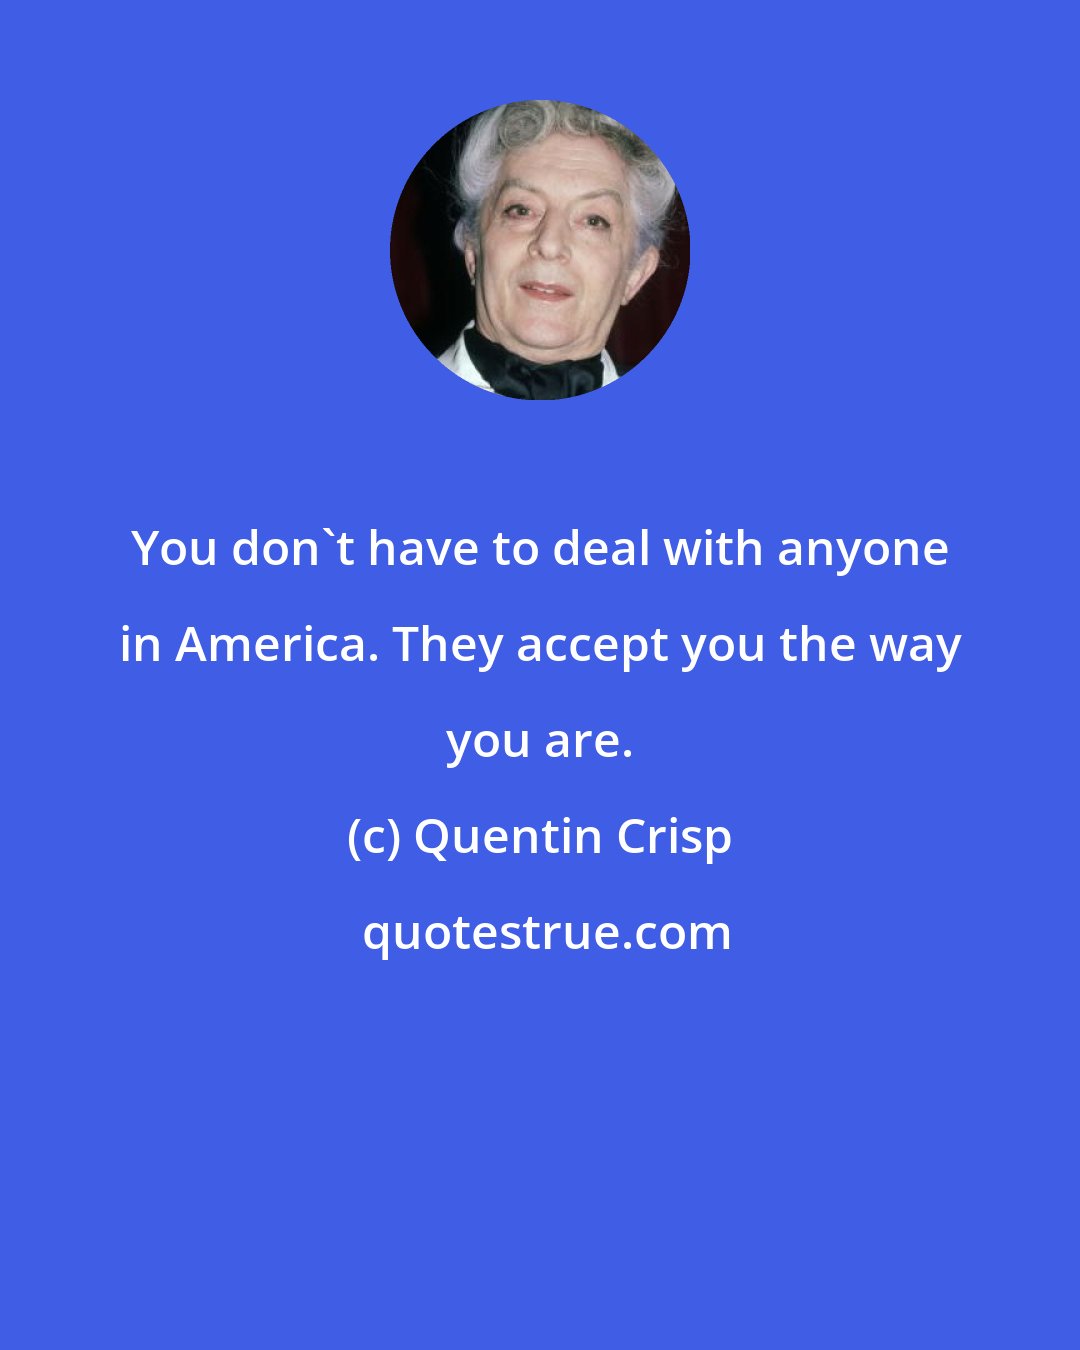 Quentin Crisp: You don't have to deal with anyone in America. They accept you the way you are.